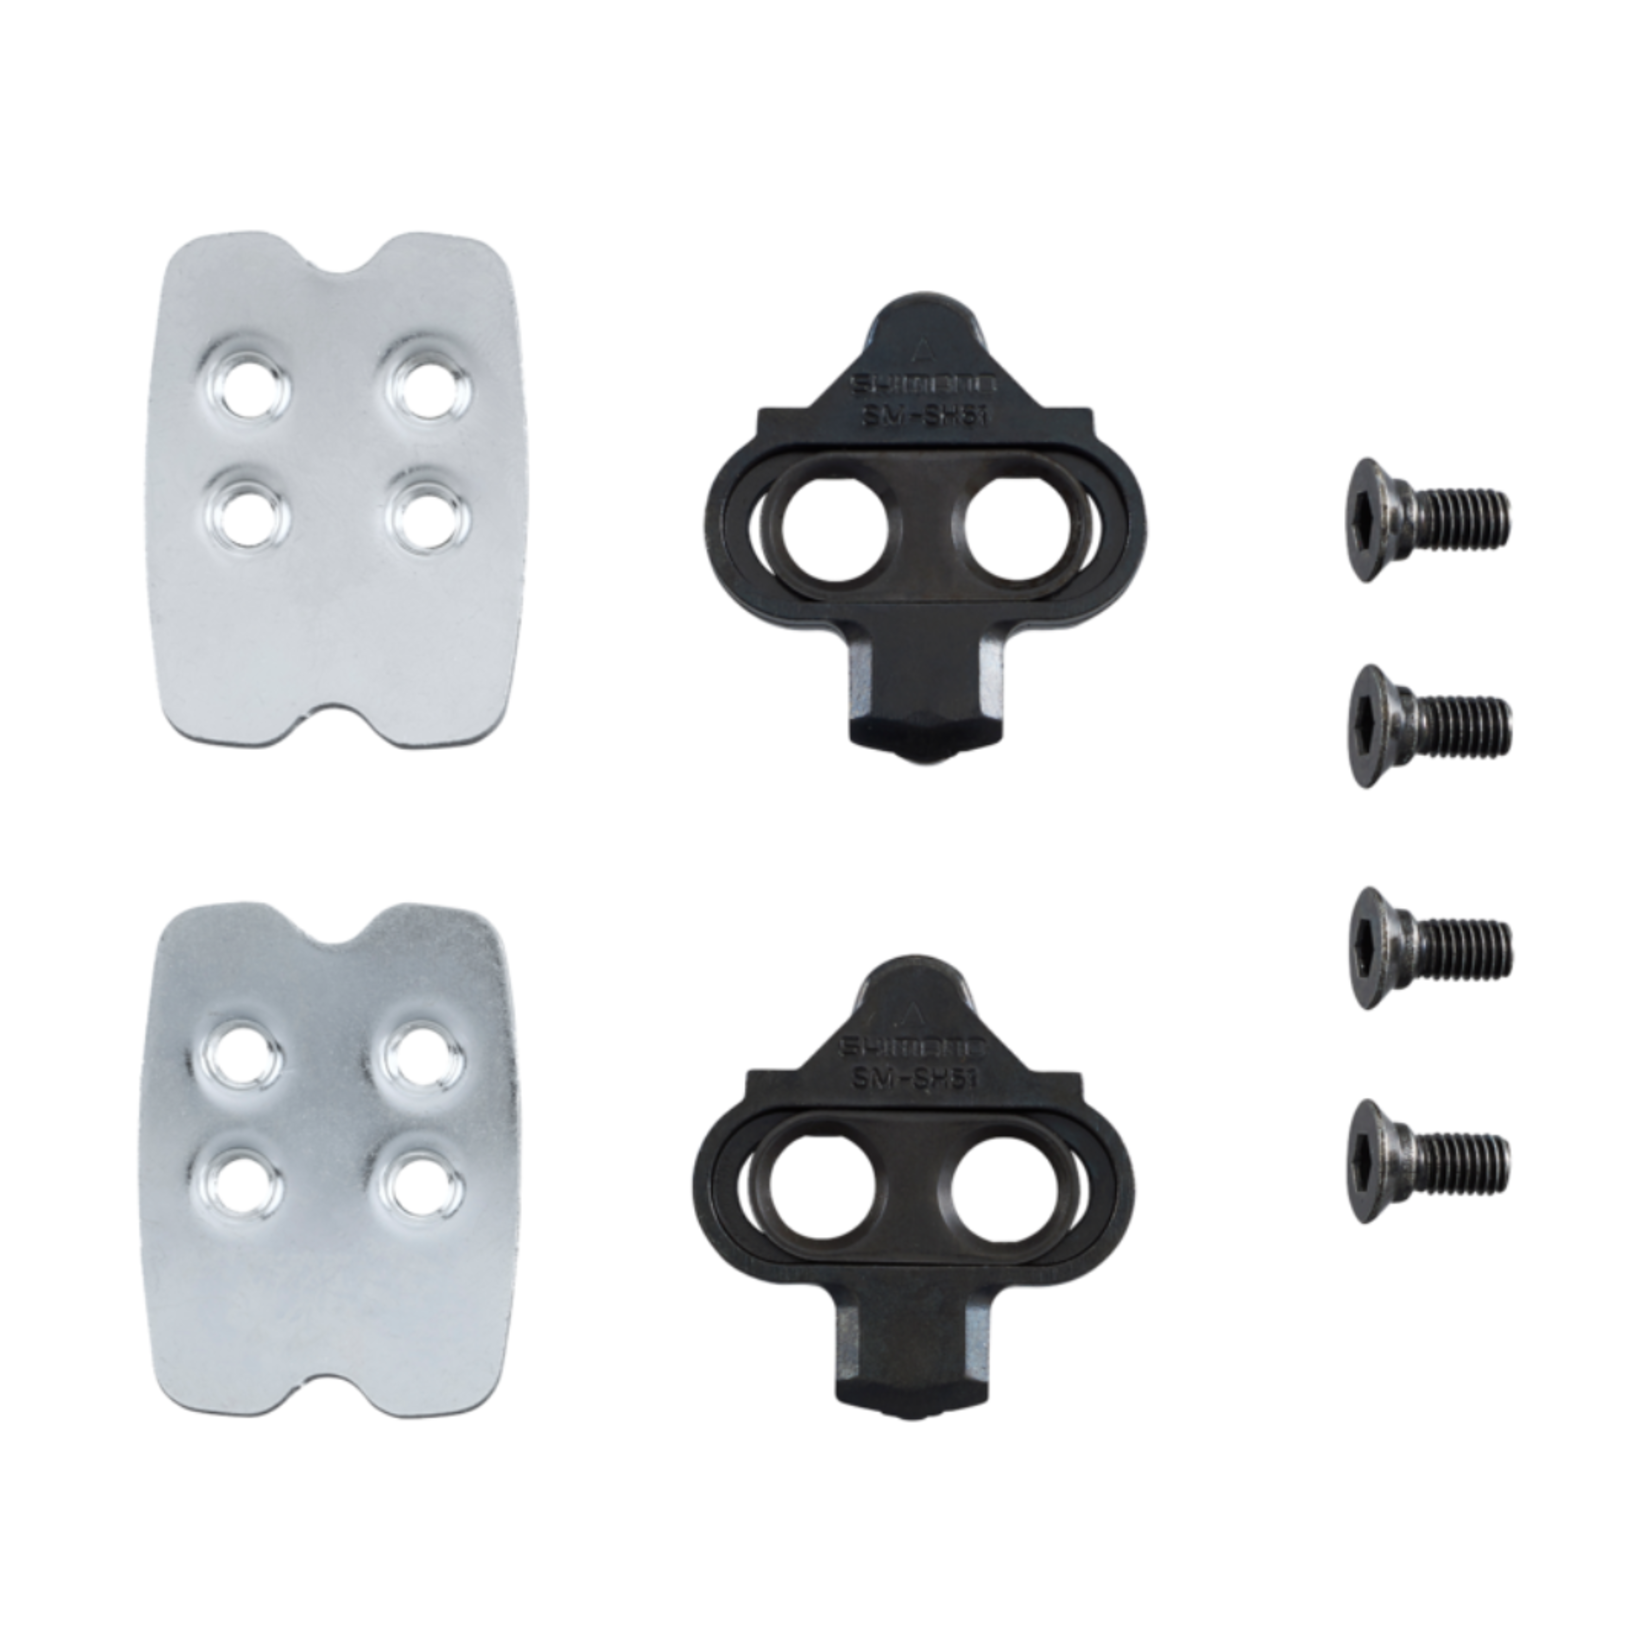 Shimano Shimano SM-SH51 Single Release SPD Cleat Set With Cleat Nut